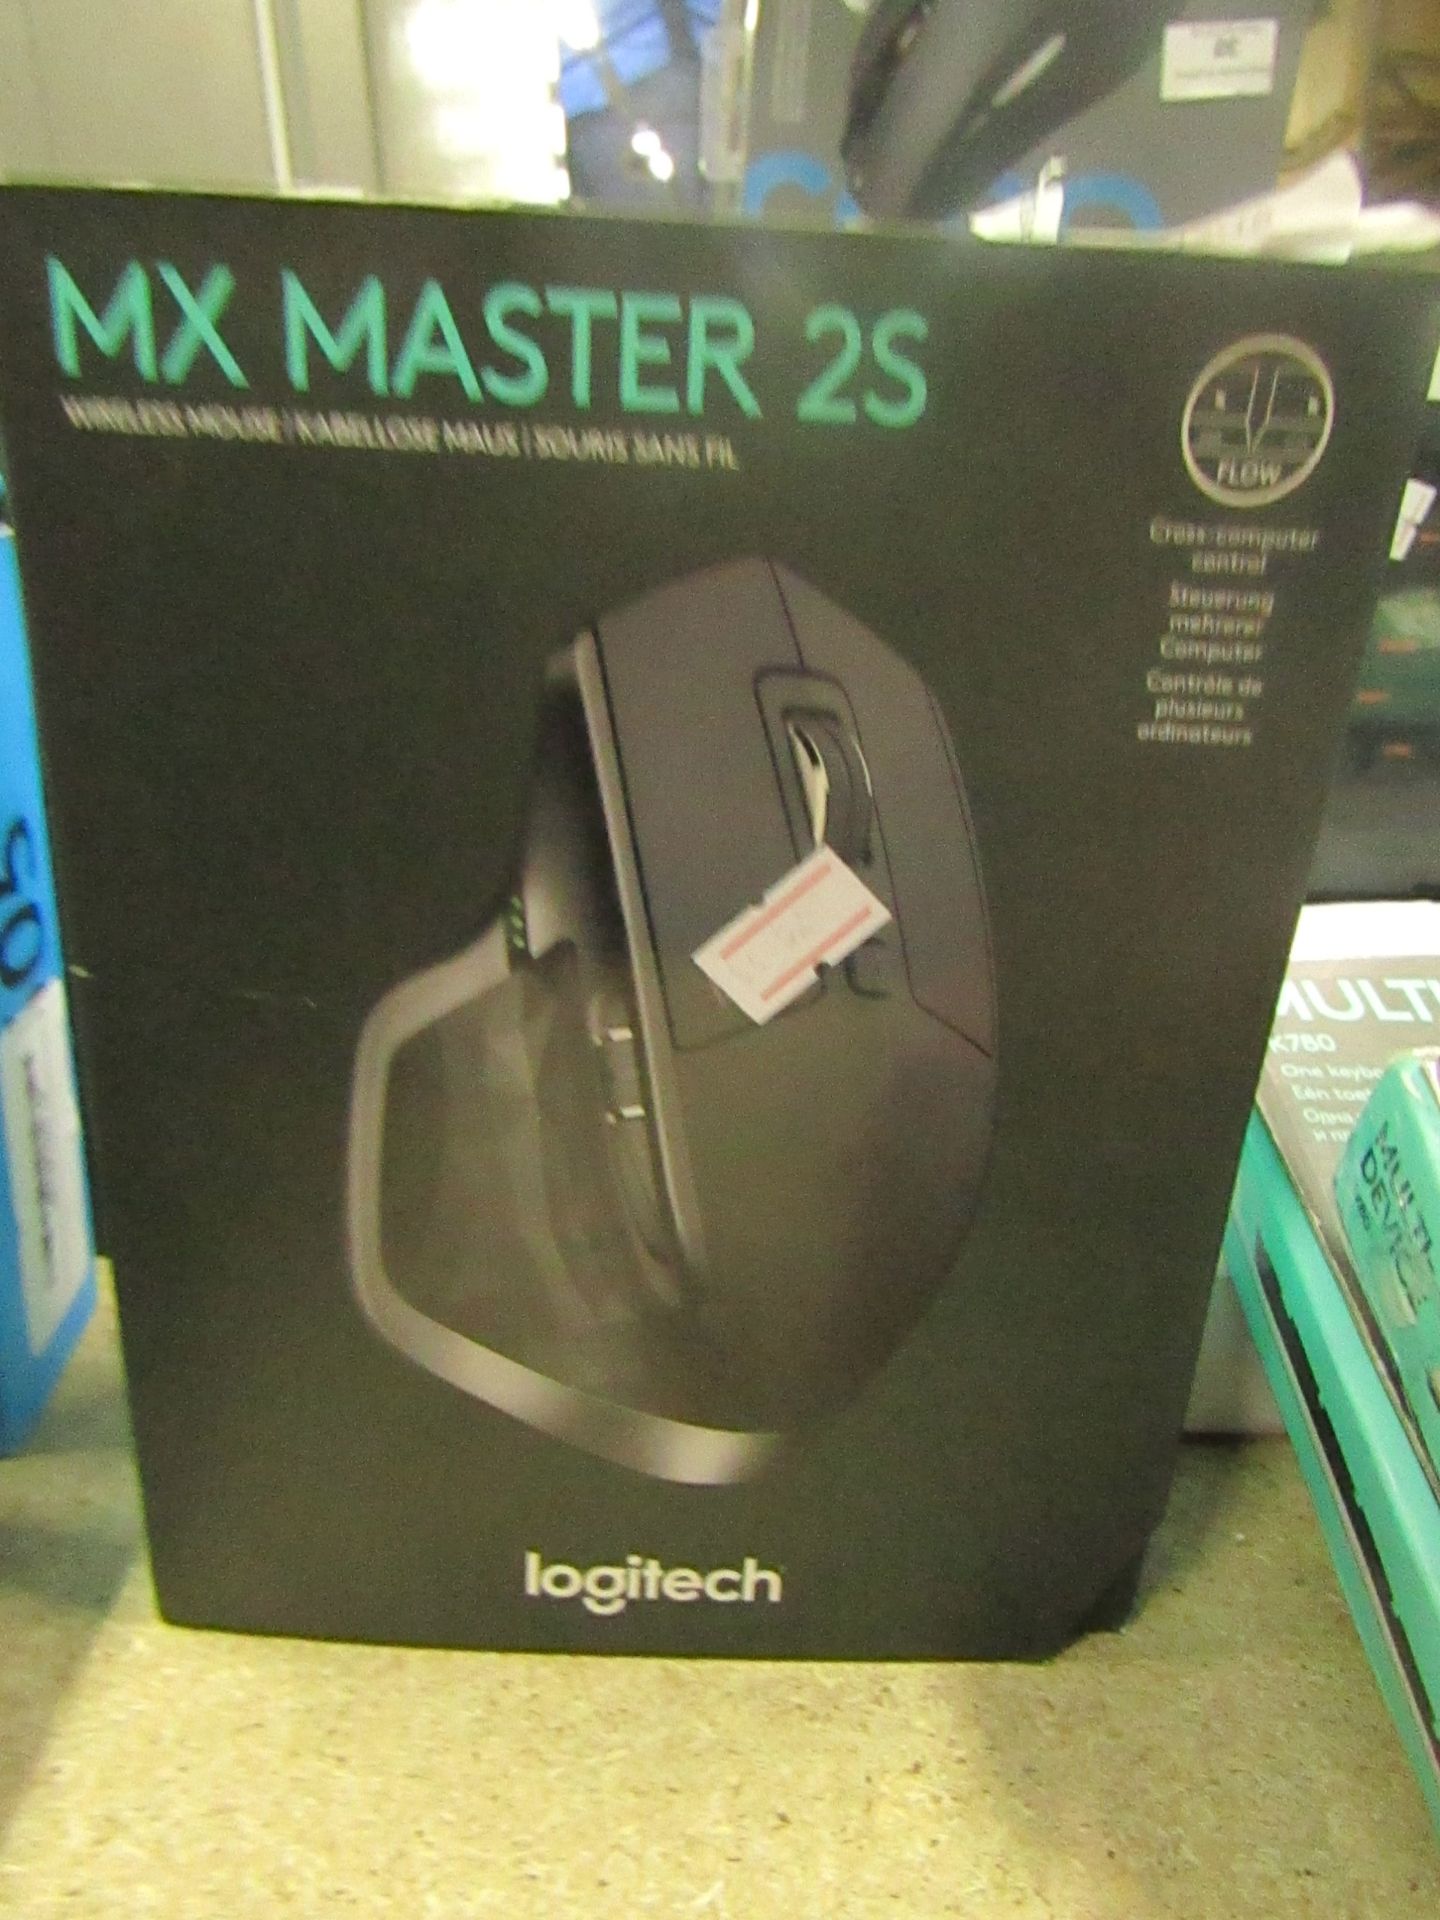 Logitech MX Master 2S gaming mouse, tested working and boxed. RRP £99.99